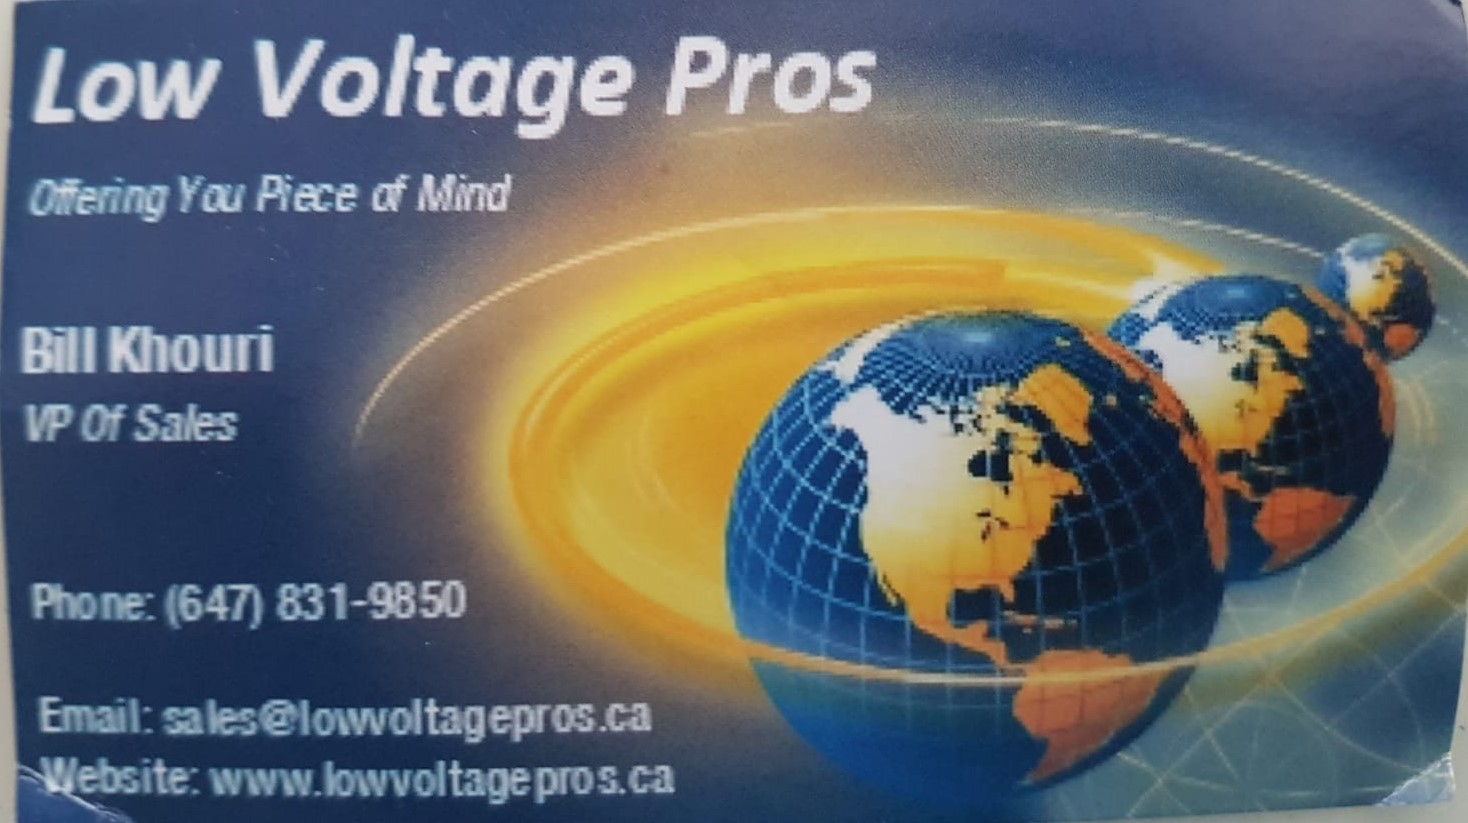 Bill Khouri - Low Voltage Pros business card